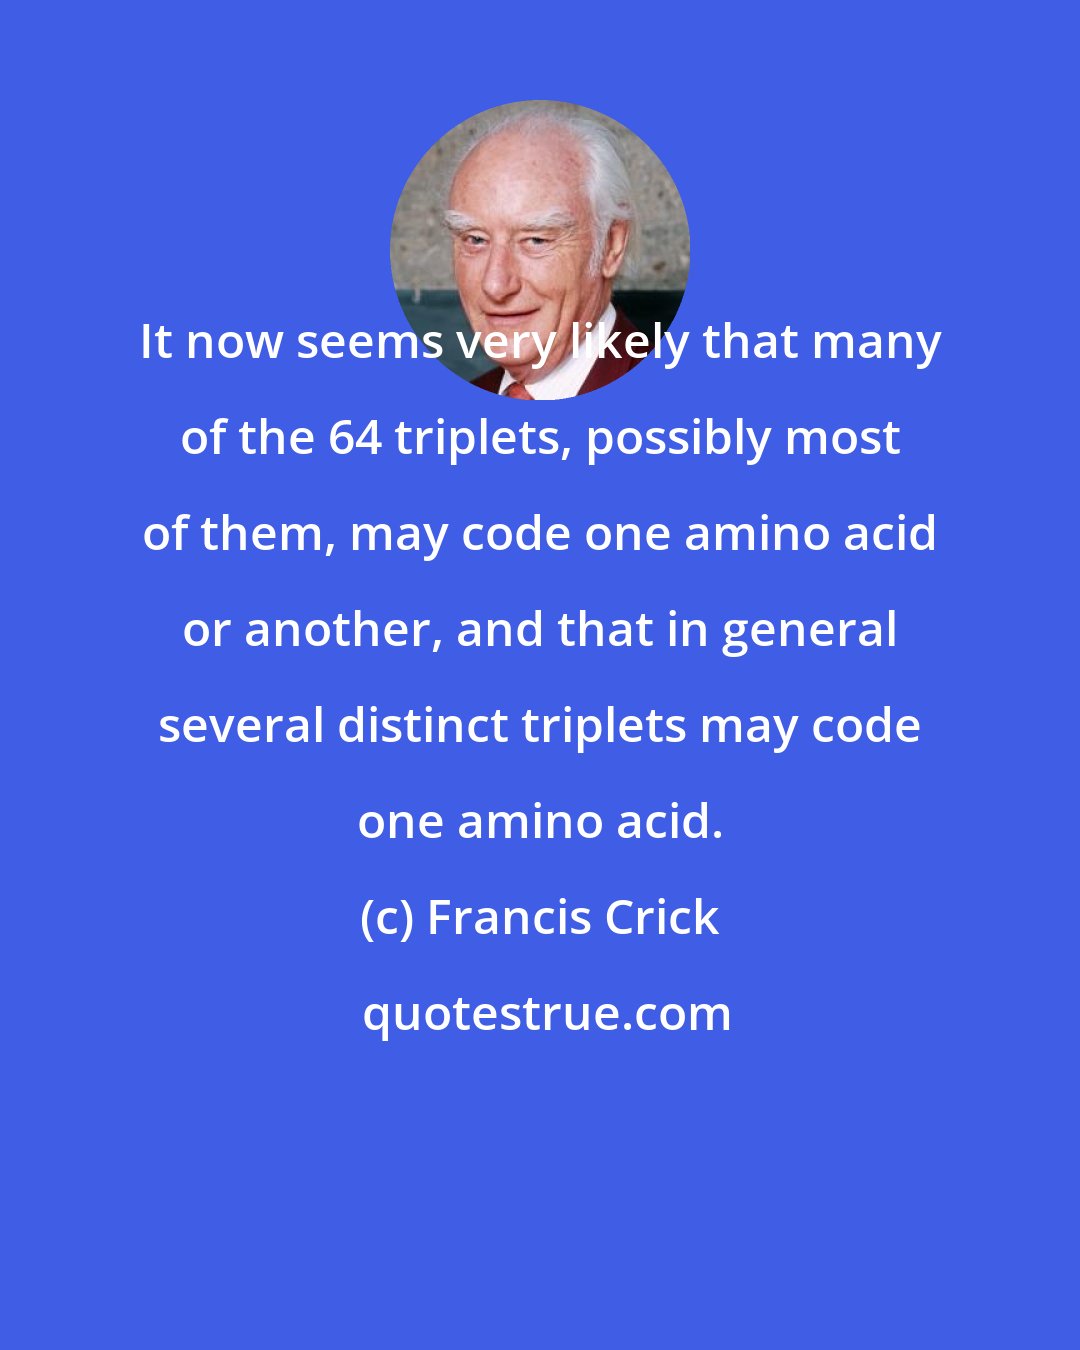 Francis Crick: It now seems very likely that many of the 64 triplets, possibly most of them, may code one amino acid or another, and that in general several distinct triplets may code one amino acid.